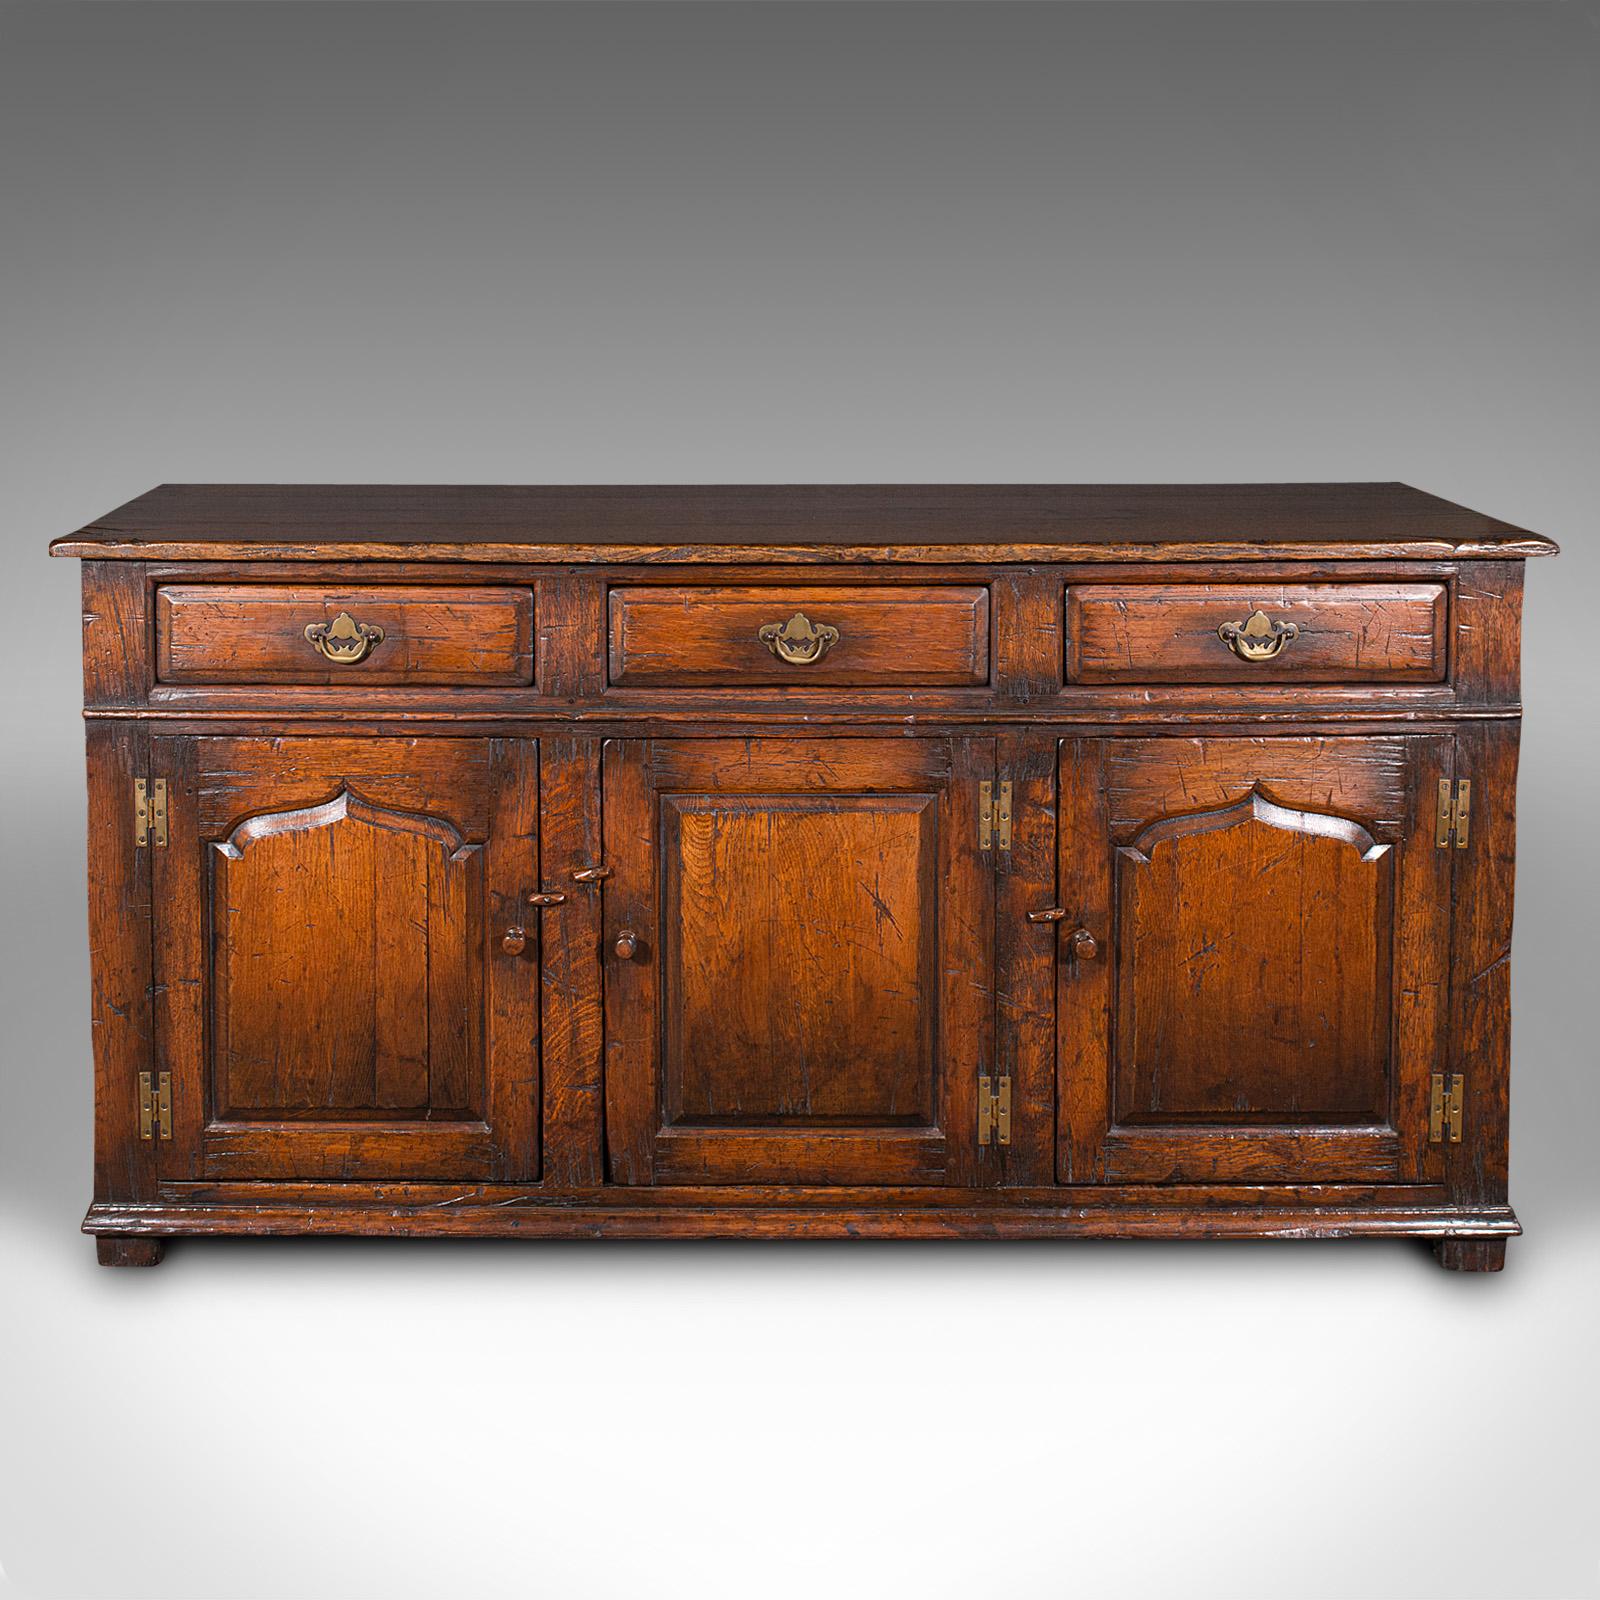 
This is a large vintage dresser base. An English, oak Georgian revival cabinet, dating to the late 20th century, circa 1980.

Of authentic Georgian taste and quality, with traditional appeal
Displays a desirable aged patina and in good